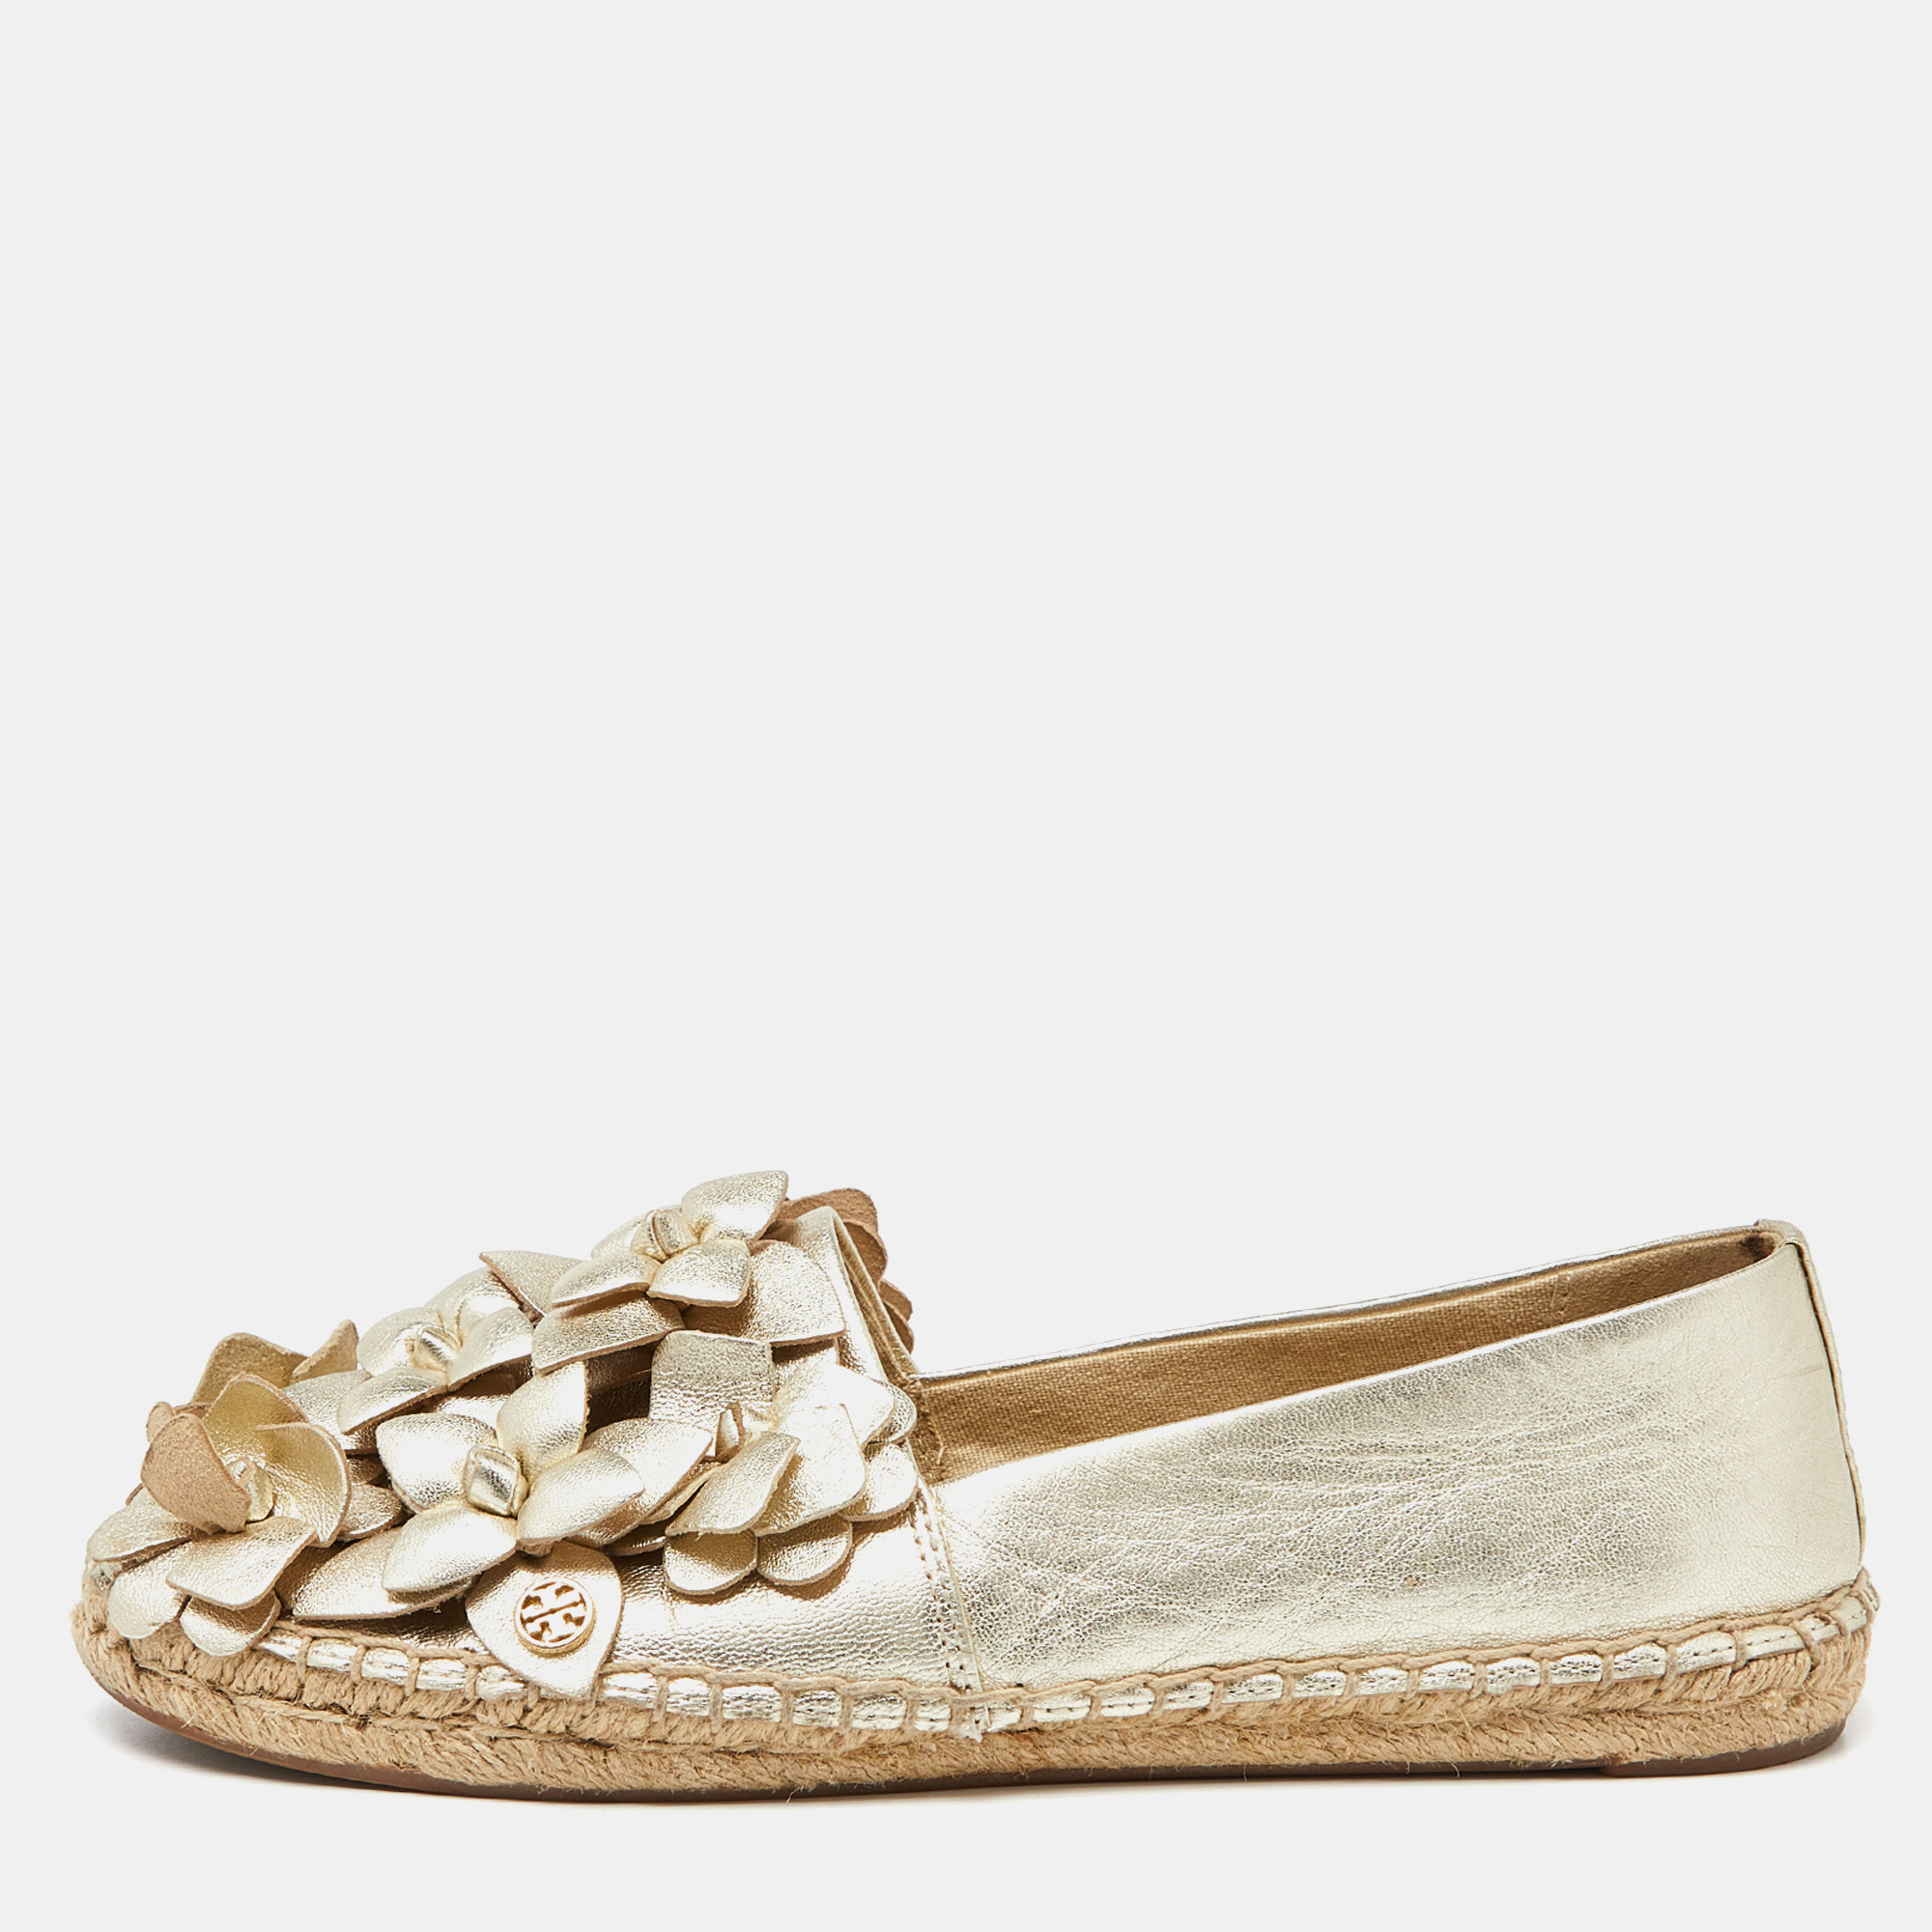 Pre-owned Tory Burch Gold Leather Blossom Espadrille Flats Size 36.5